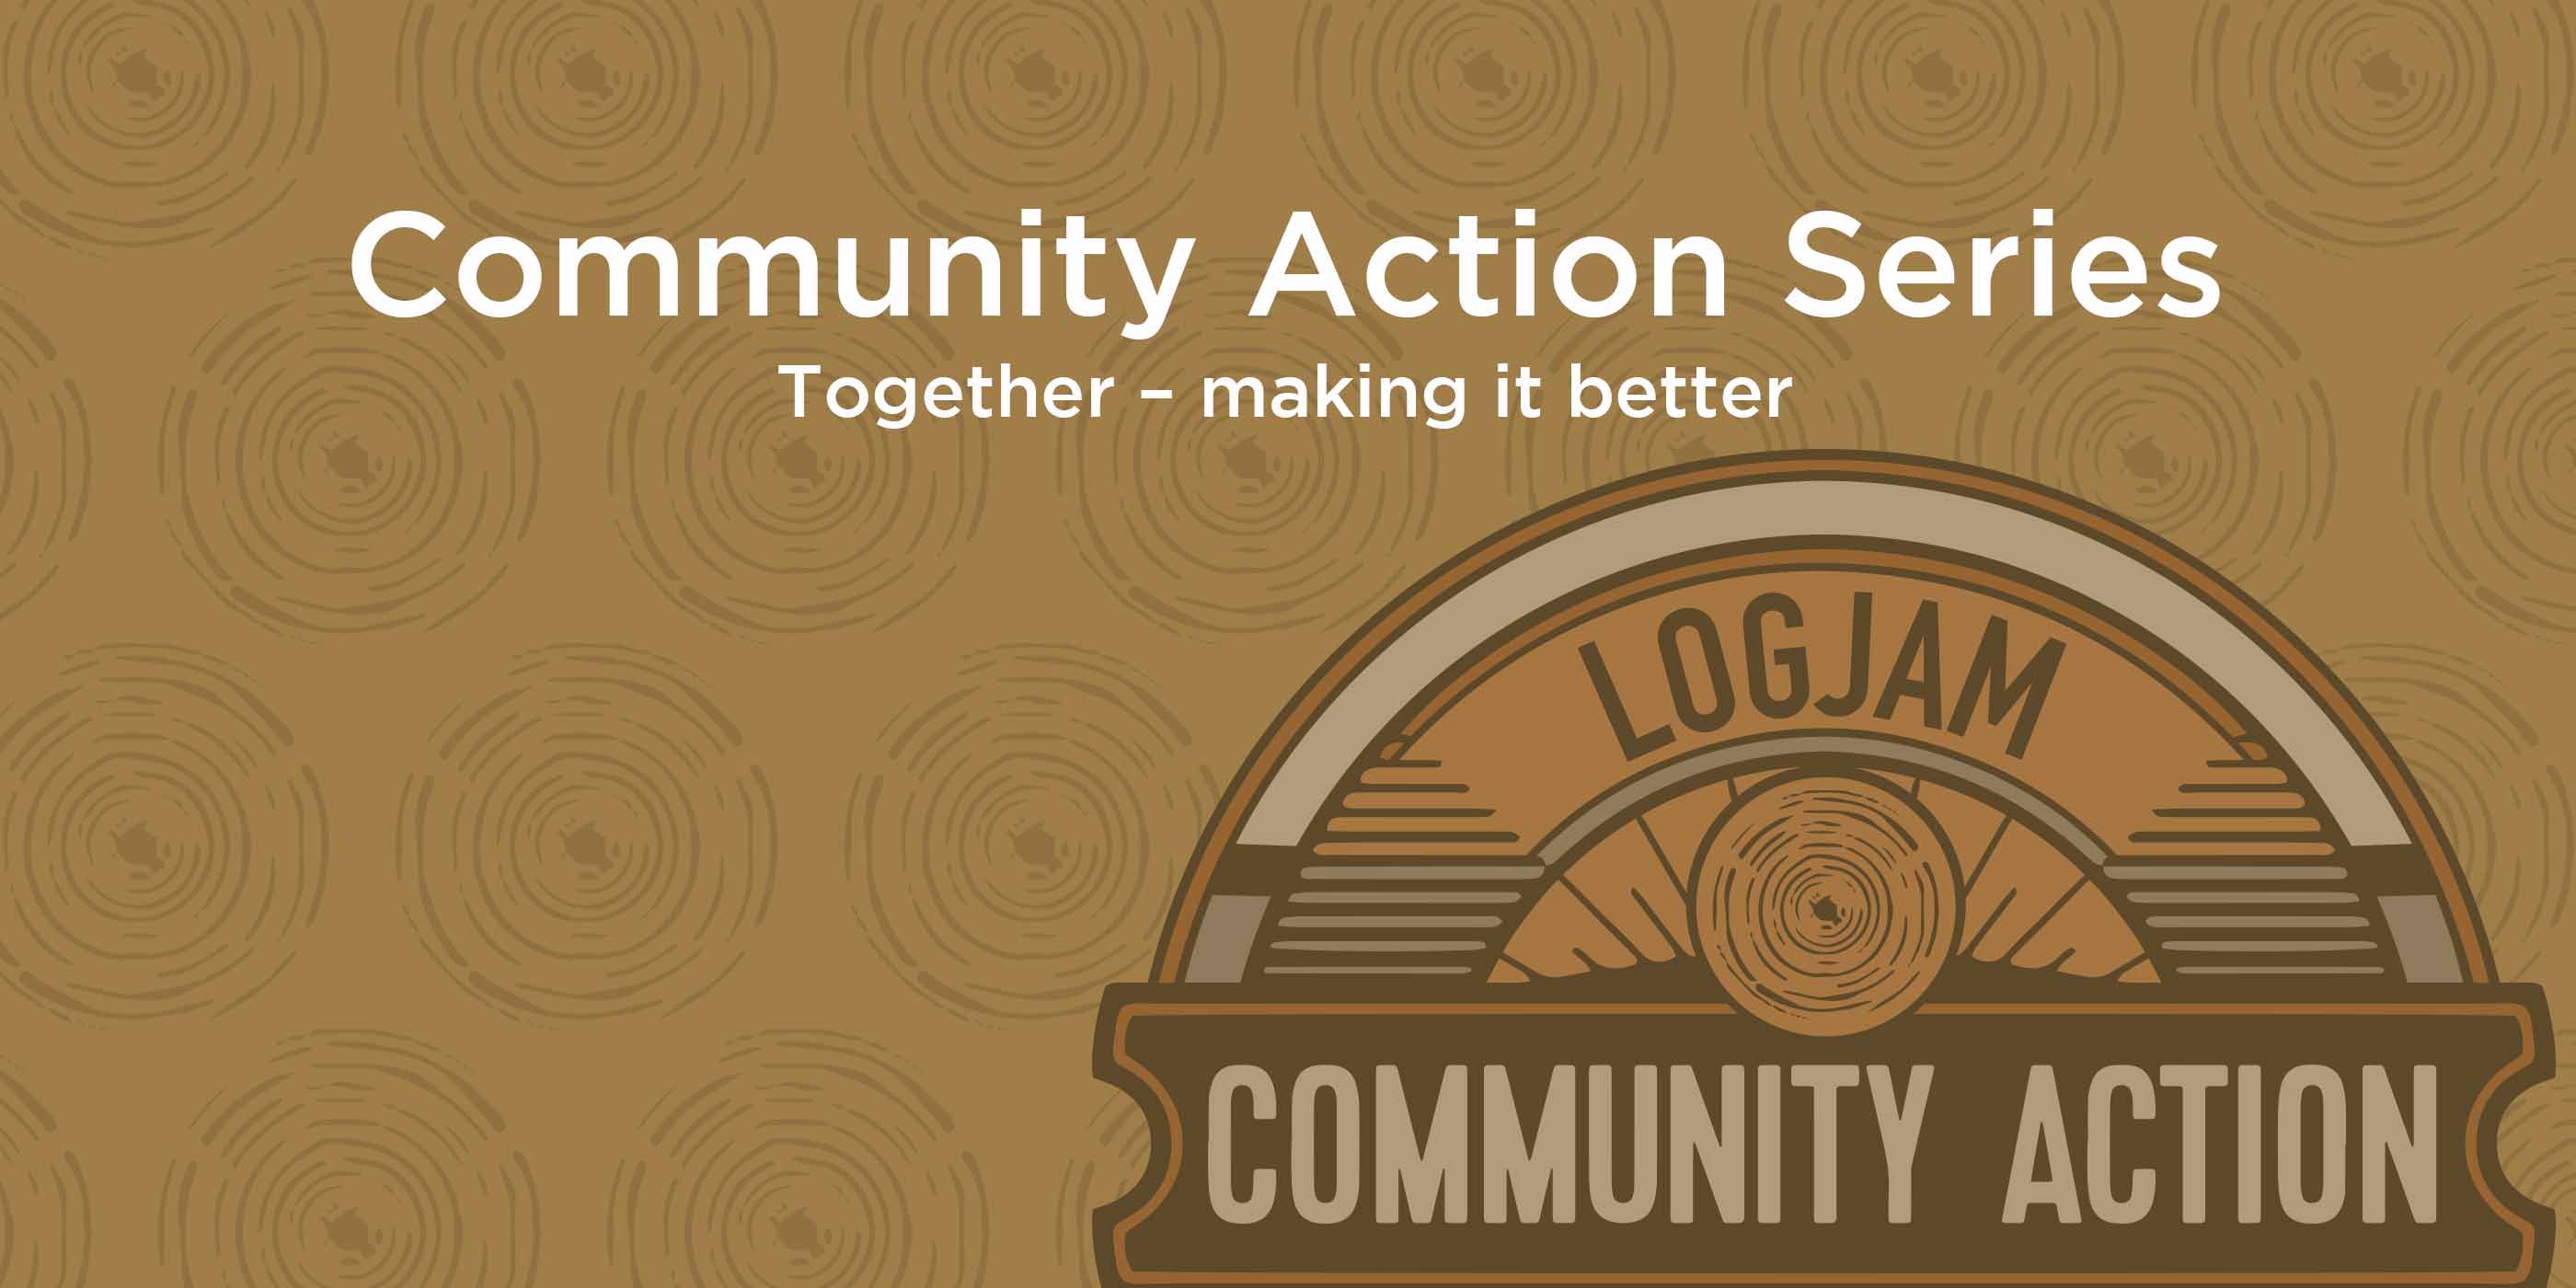 The Logjam Foundation’s Community Action Series is an ongoing series of events dedicated to raising funds and awareness for local non-profit organizations.